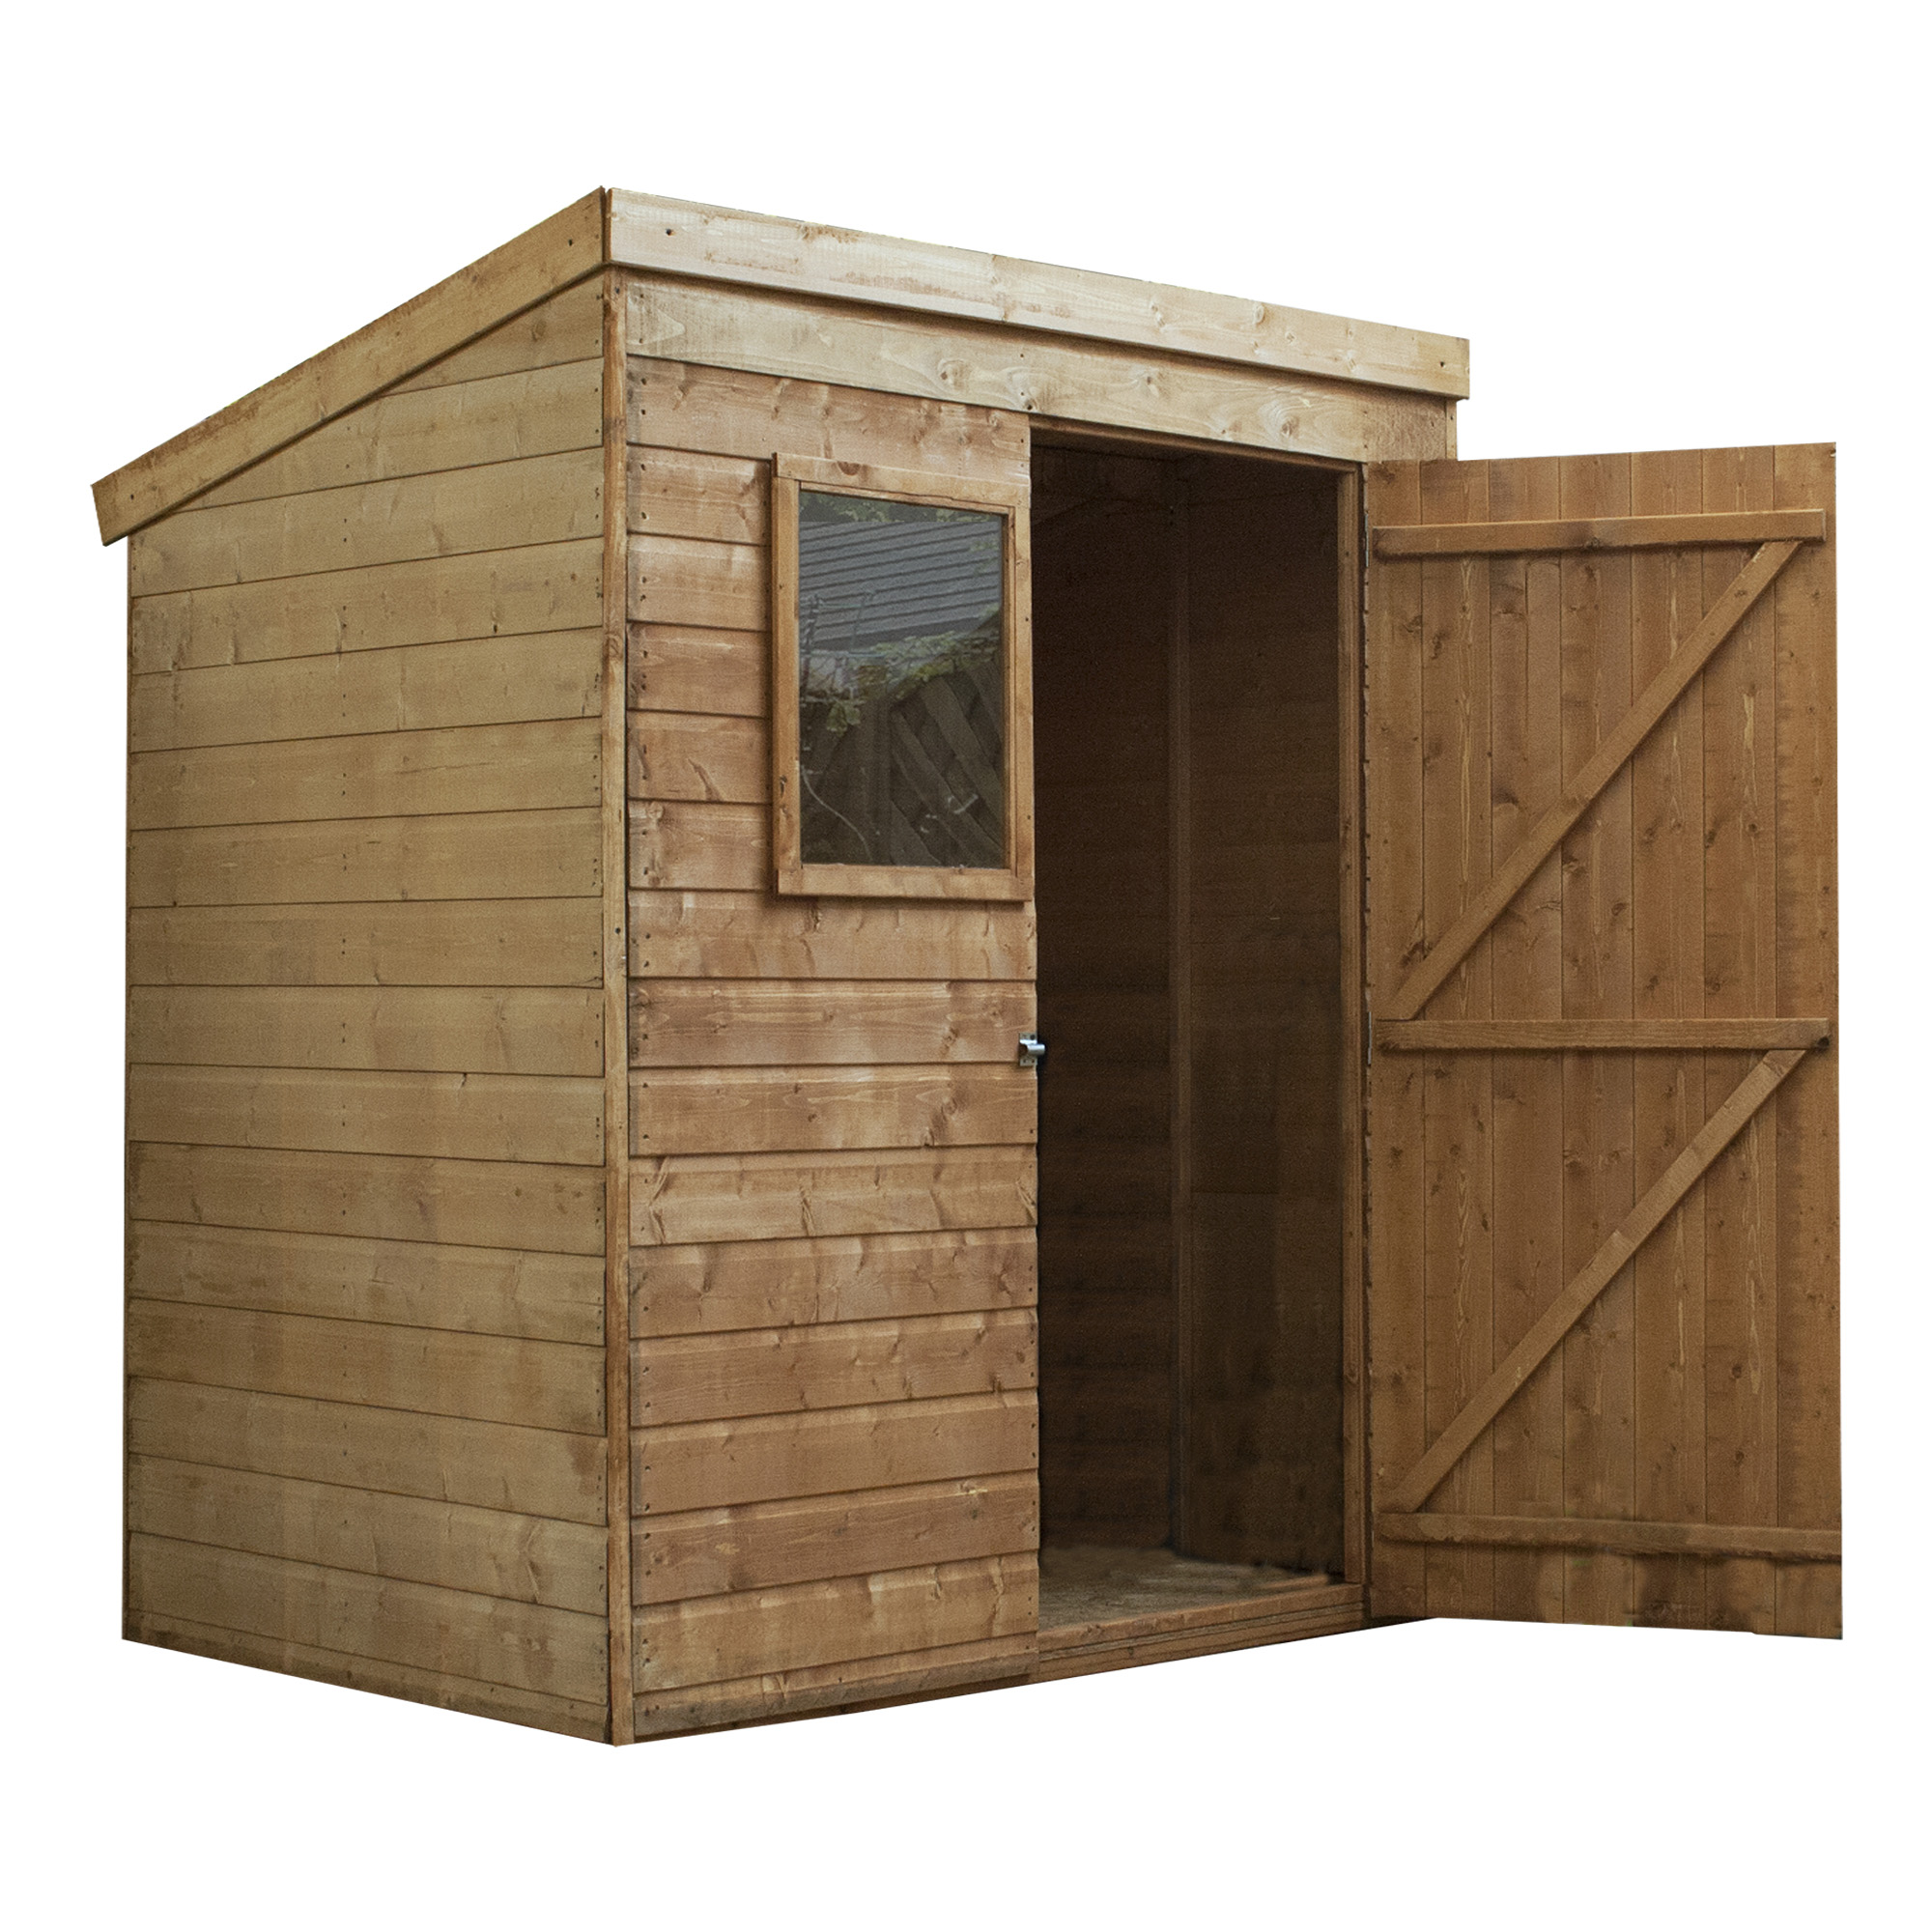 If you’re buying a new garden shed, read this first